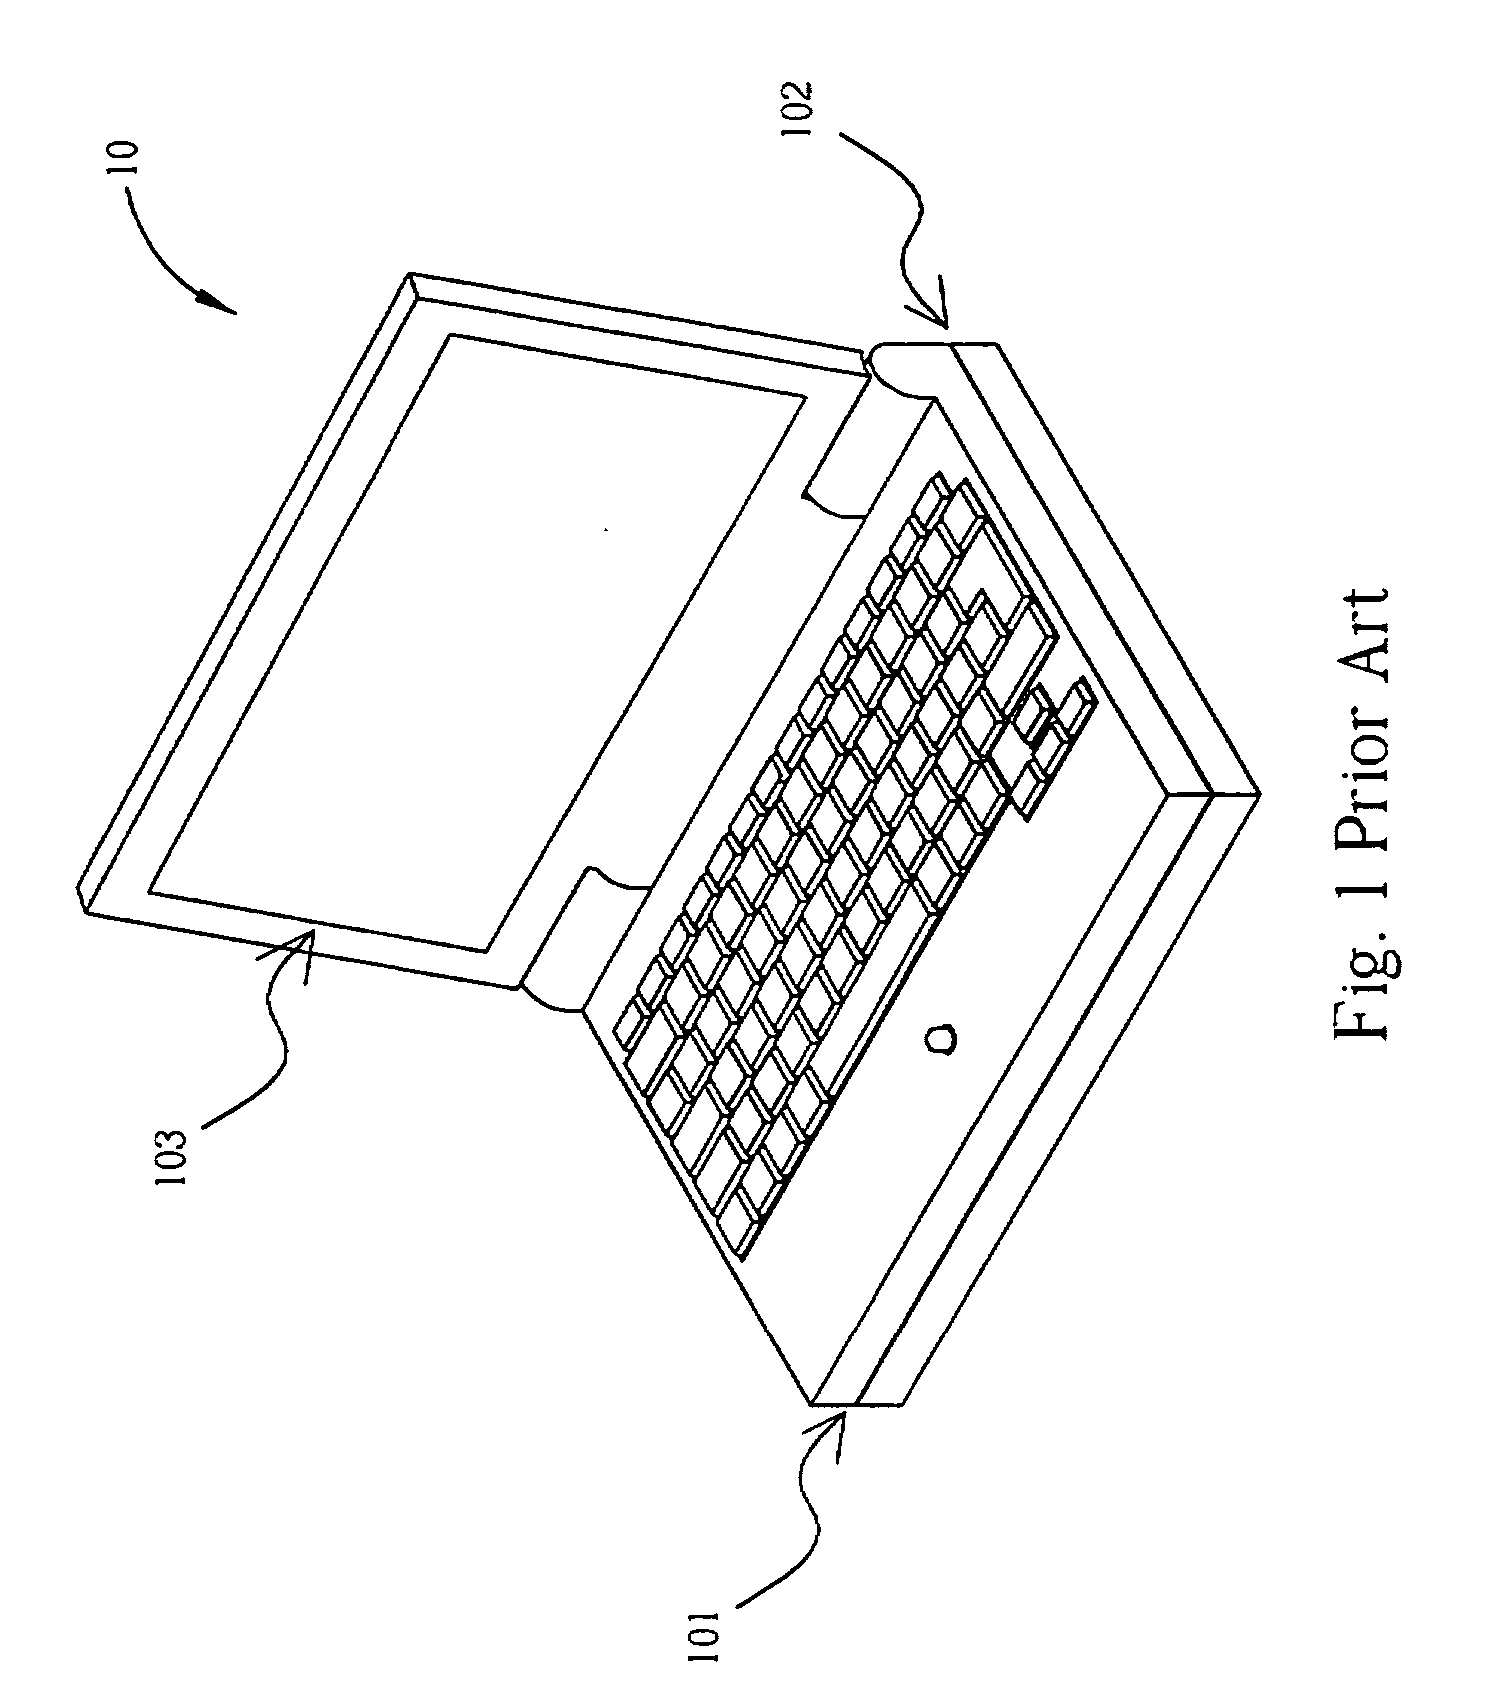 Electronic device capable of releasing ESD